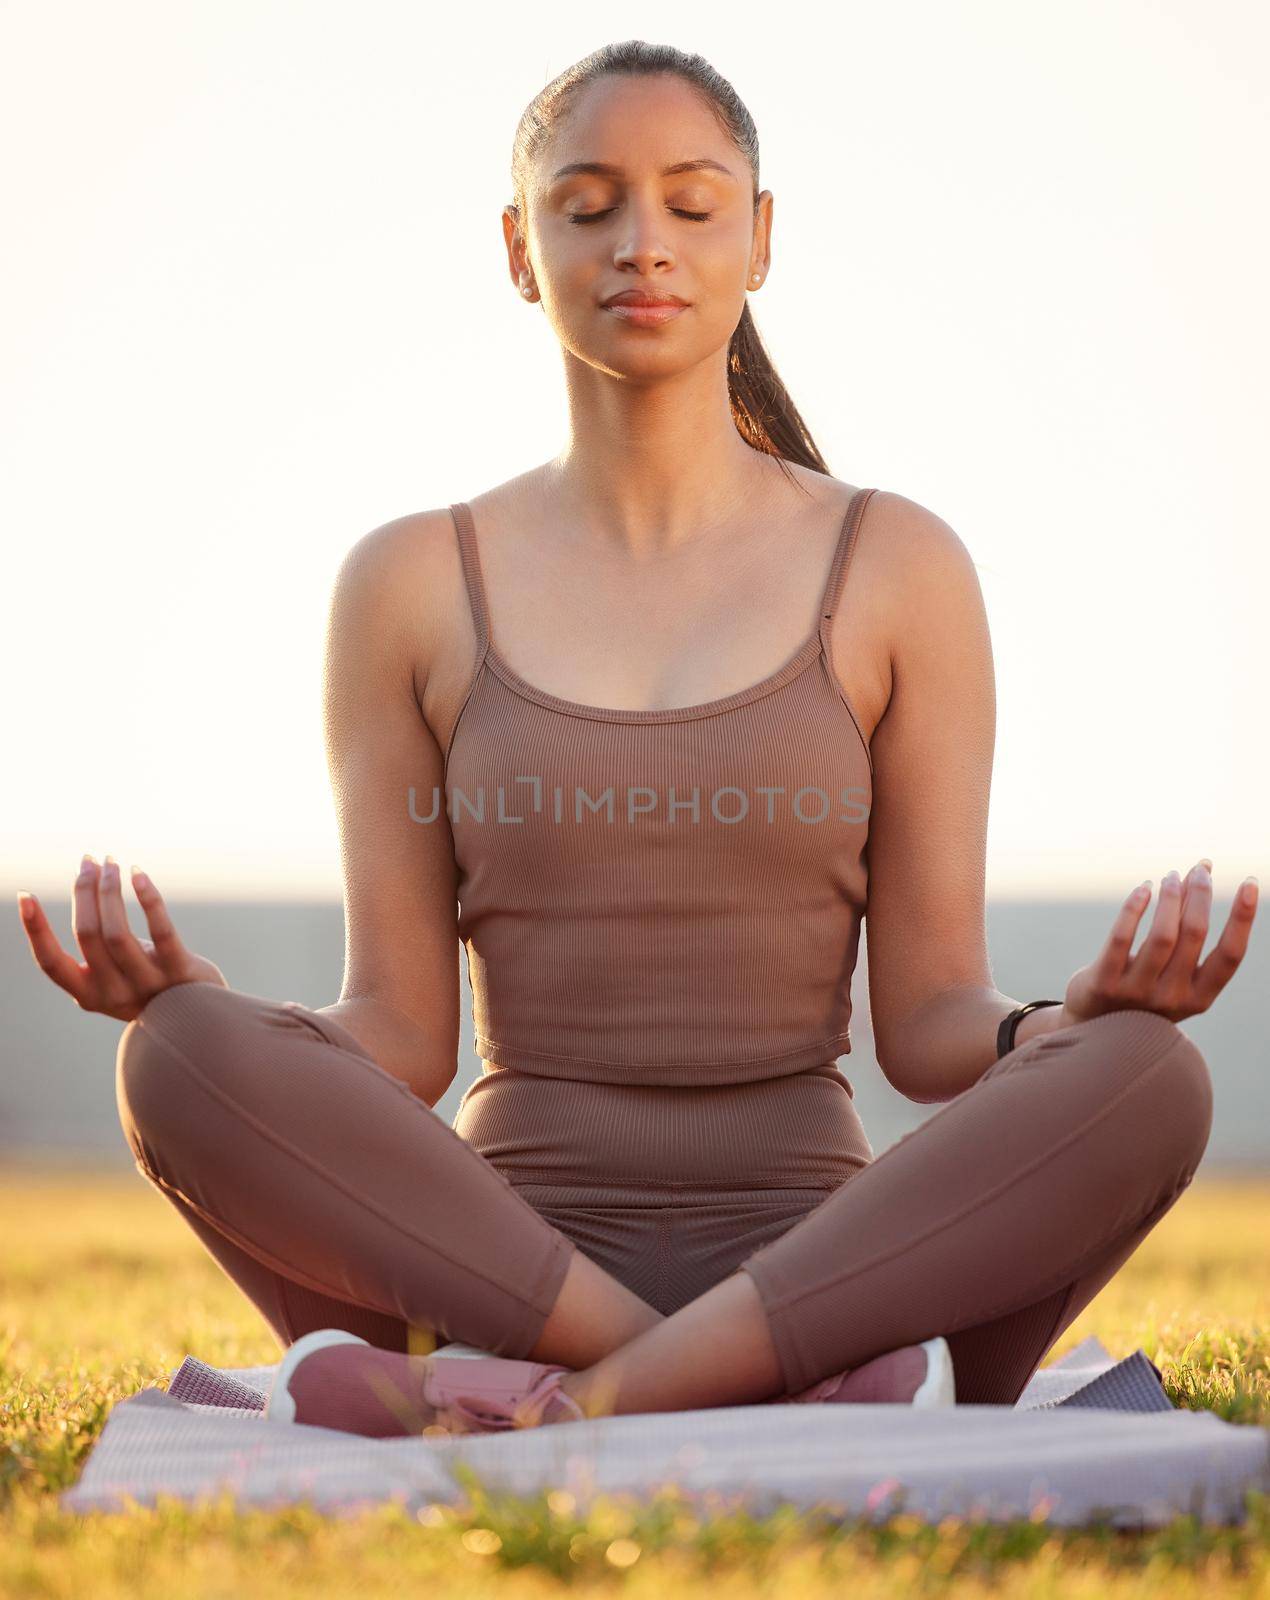 Enjoying her time in a garden of zen. Shot of a sporty young woman meditating while exercising outdoors. by YuriArcurs